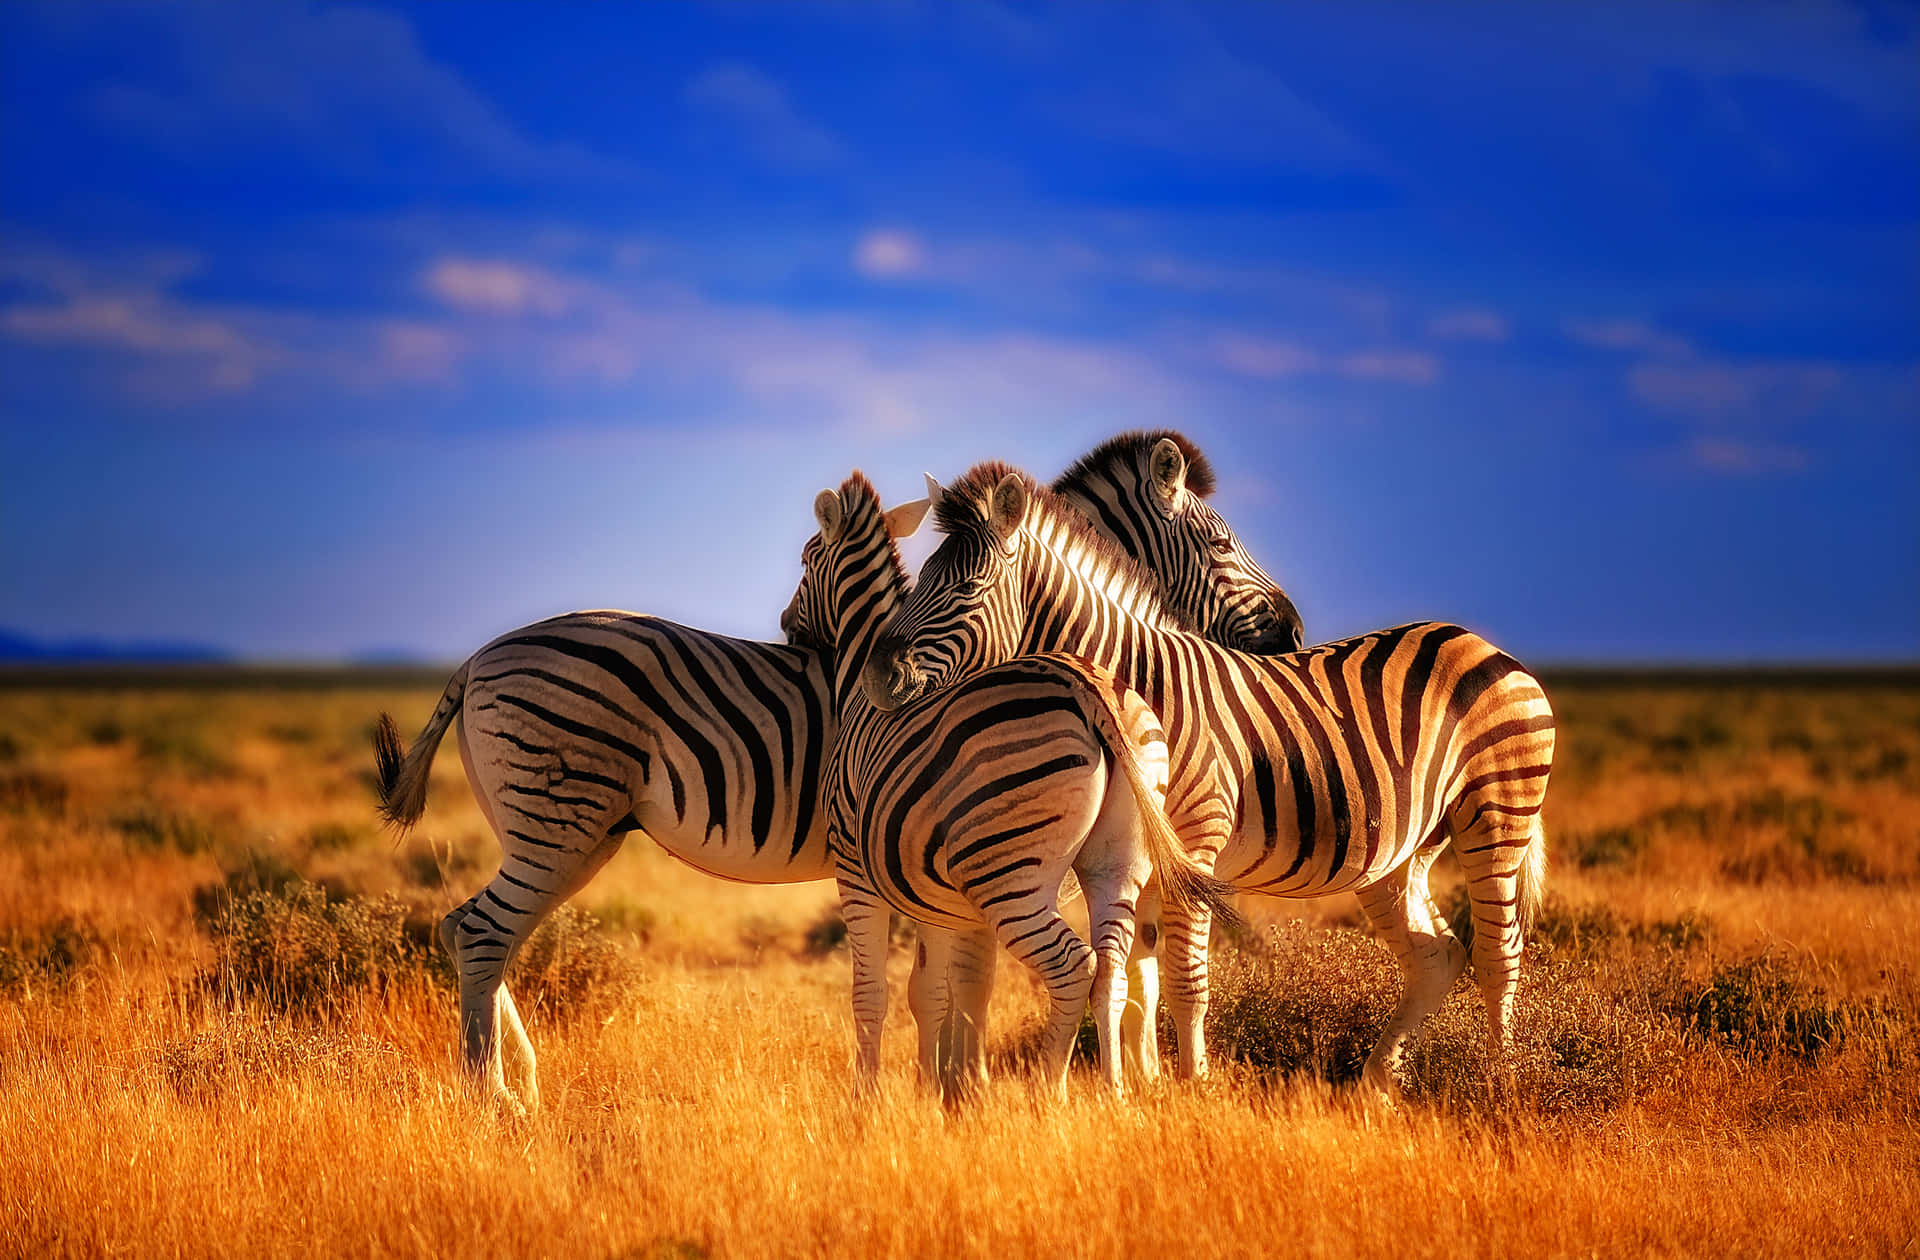 A Zebras majestic stripes stand out on its brown fur